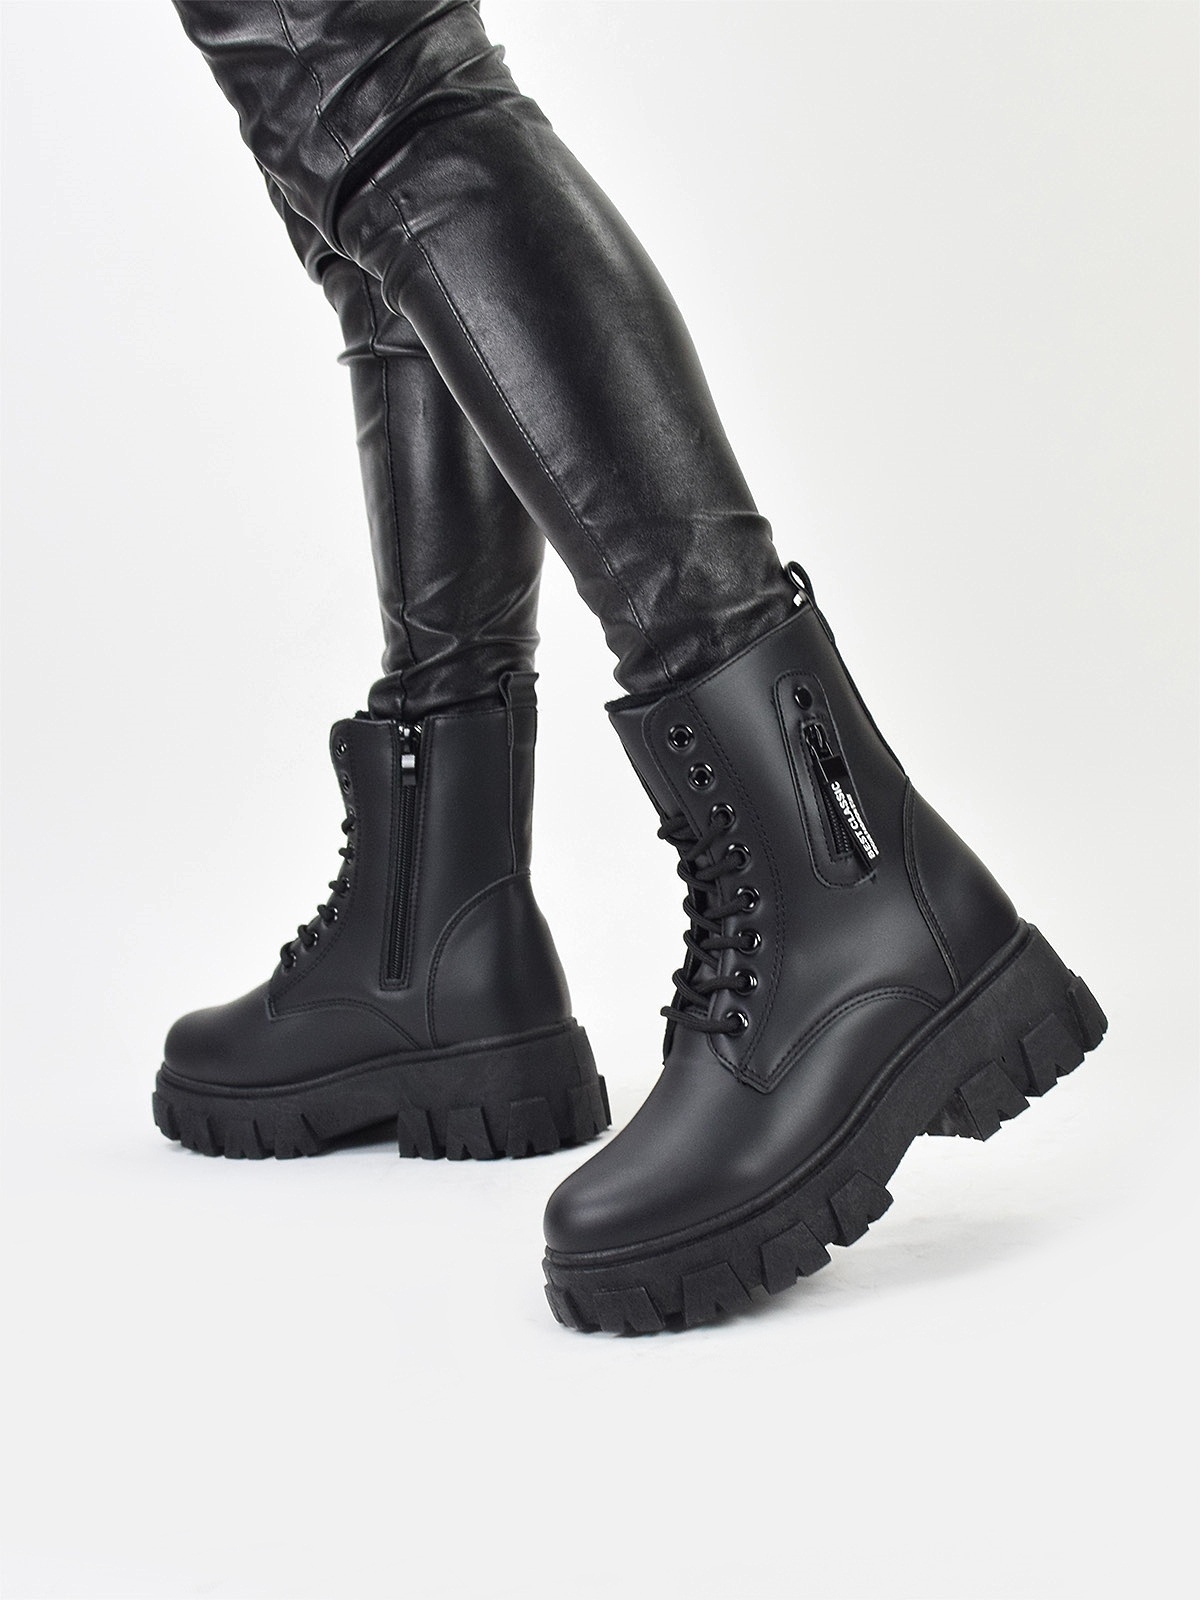 Classic design lace up ankle boots with side zip detail in black